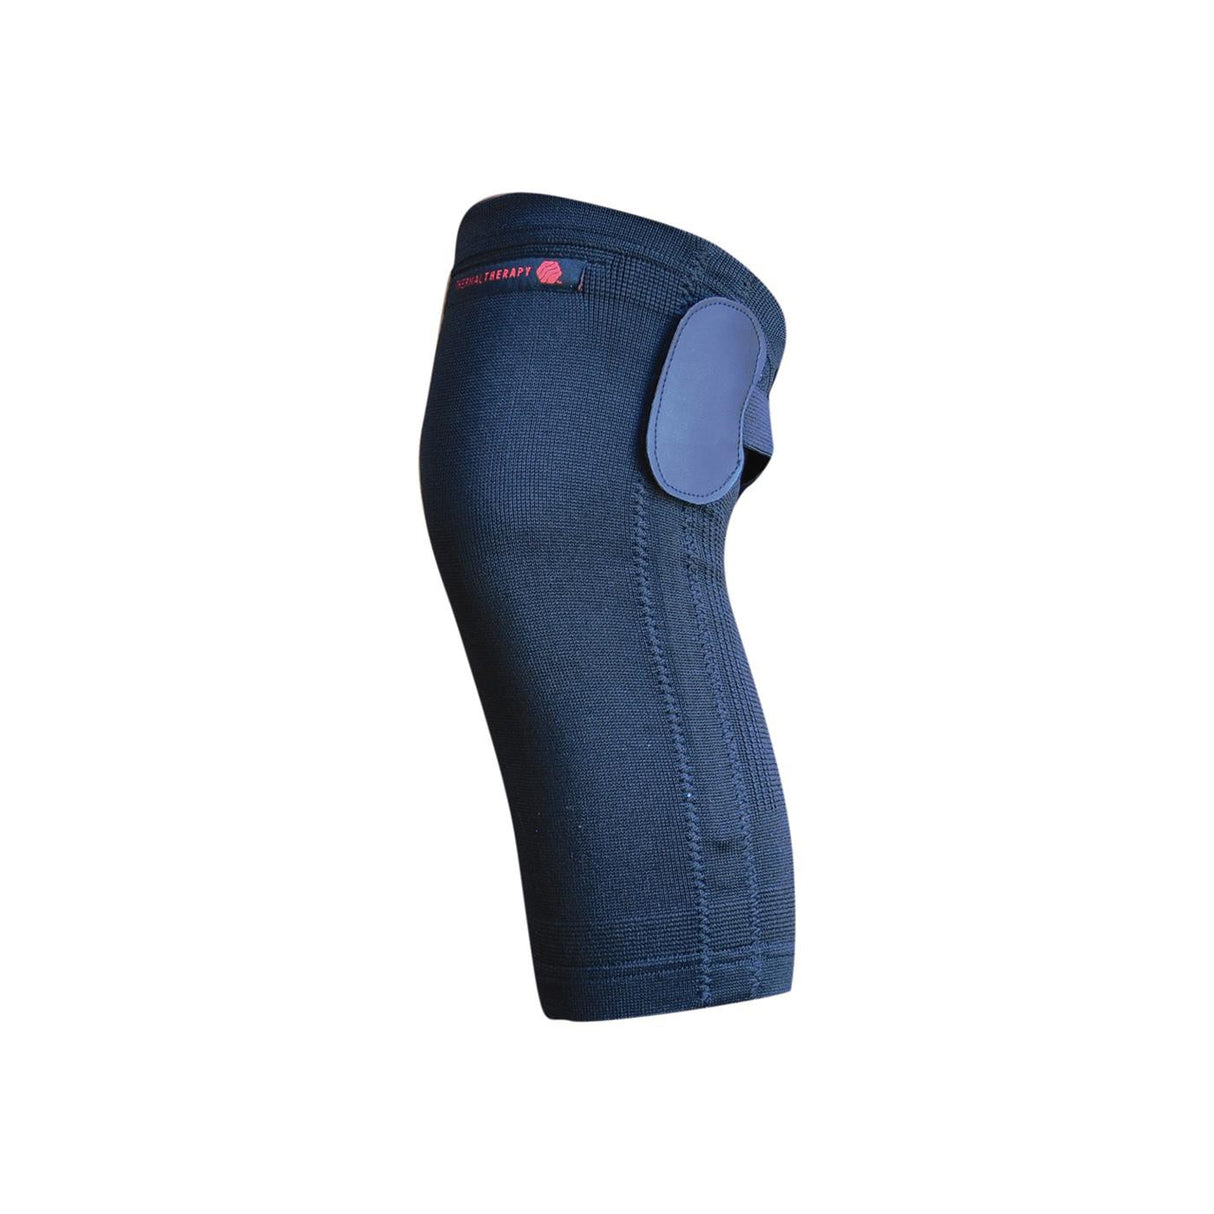 Thermal Therapy Knee Brace W/ Velcro